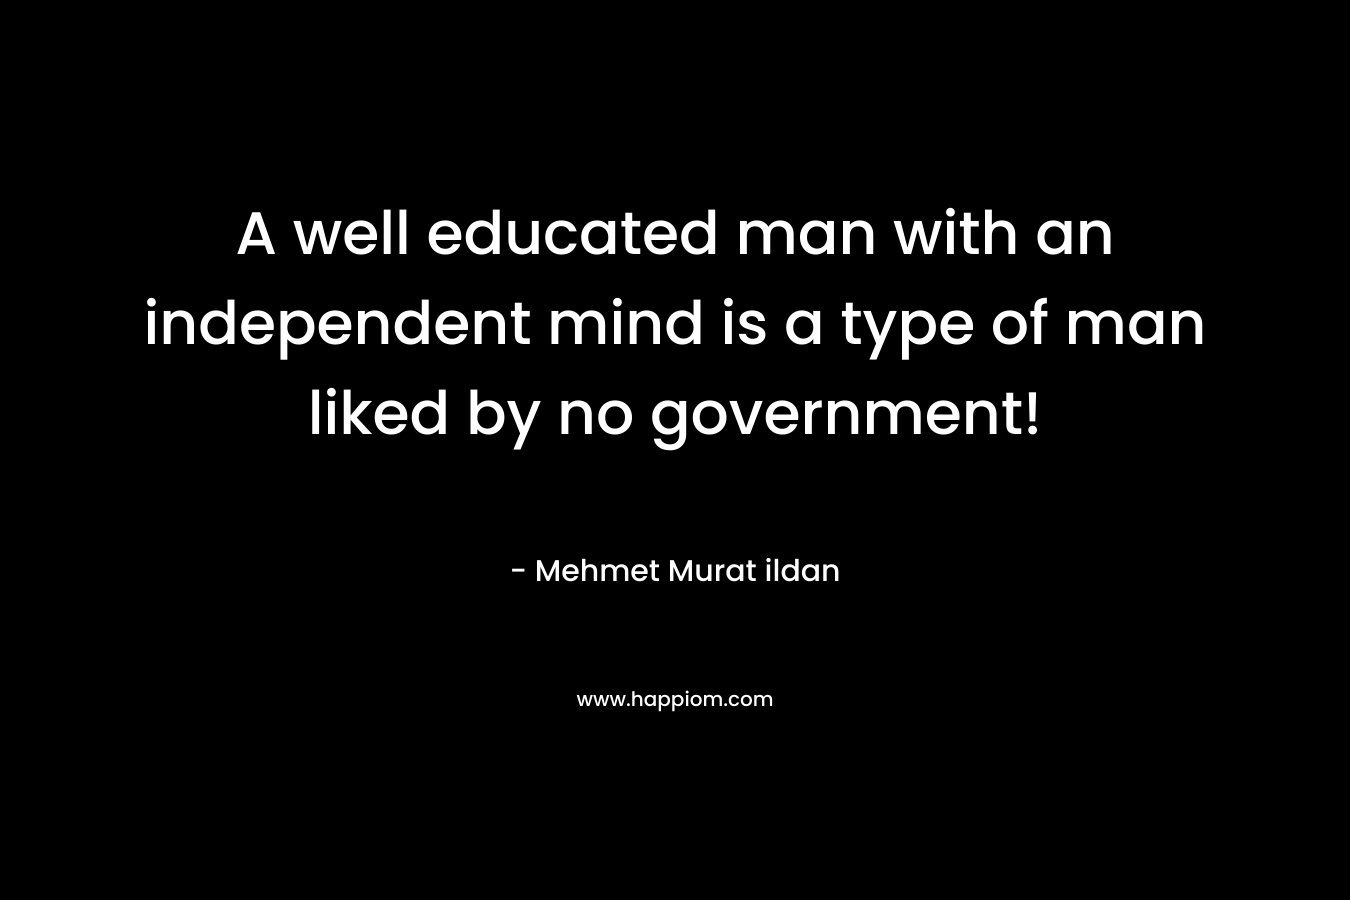 A well educated man with an independent mind is a type of man liked by no government! – Mehmet Murat ildan